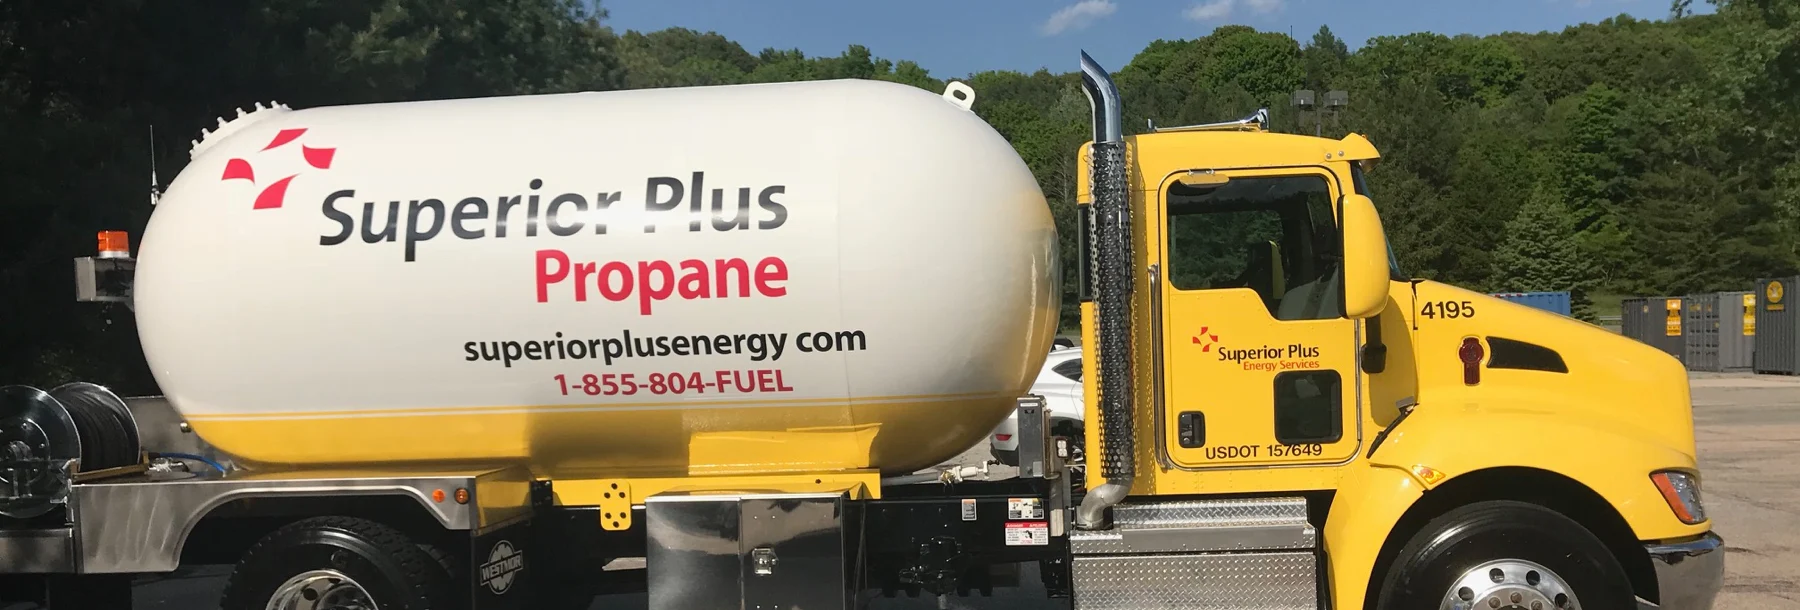 Superior Plus Propane improves safety and reduces costs with Camera Connector